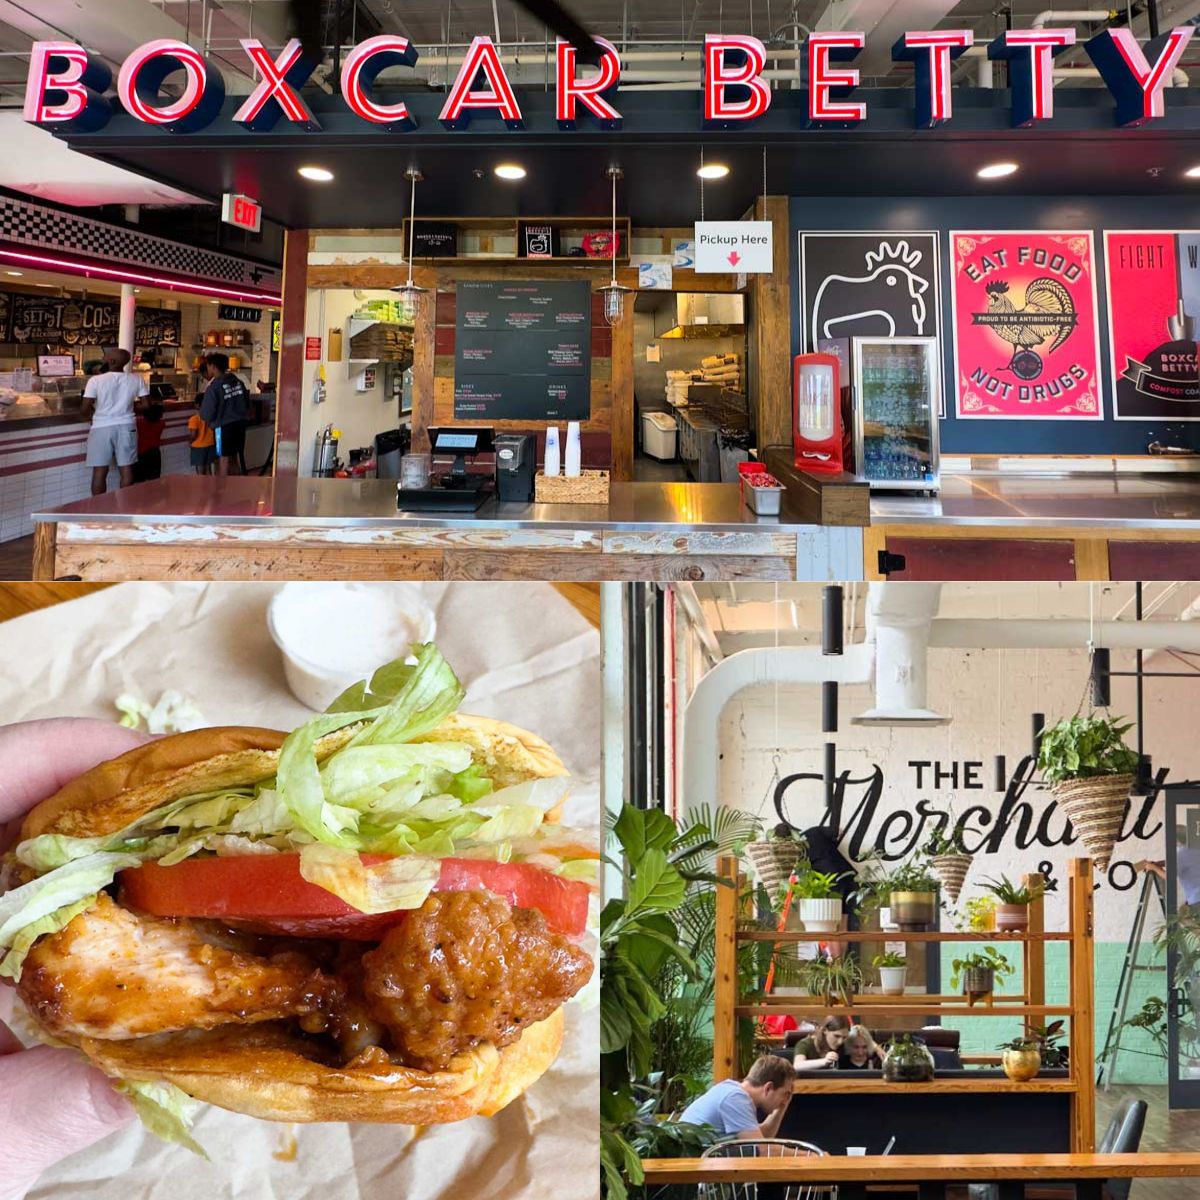 The photo collage shows the sign outside the Boxcar Betty restaurant next to a photo of the chicken sandwich you can order there.